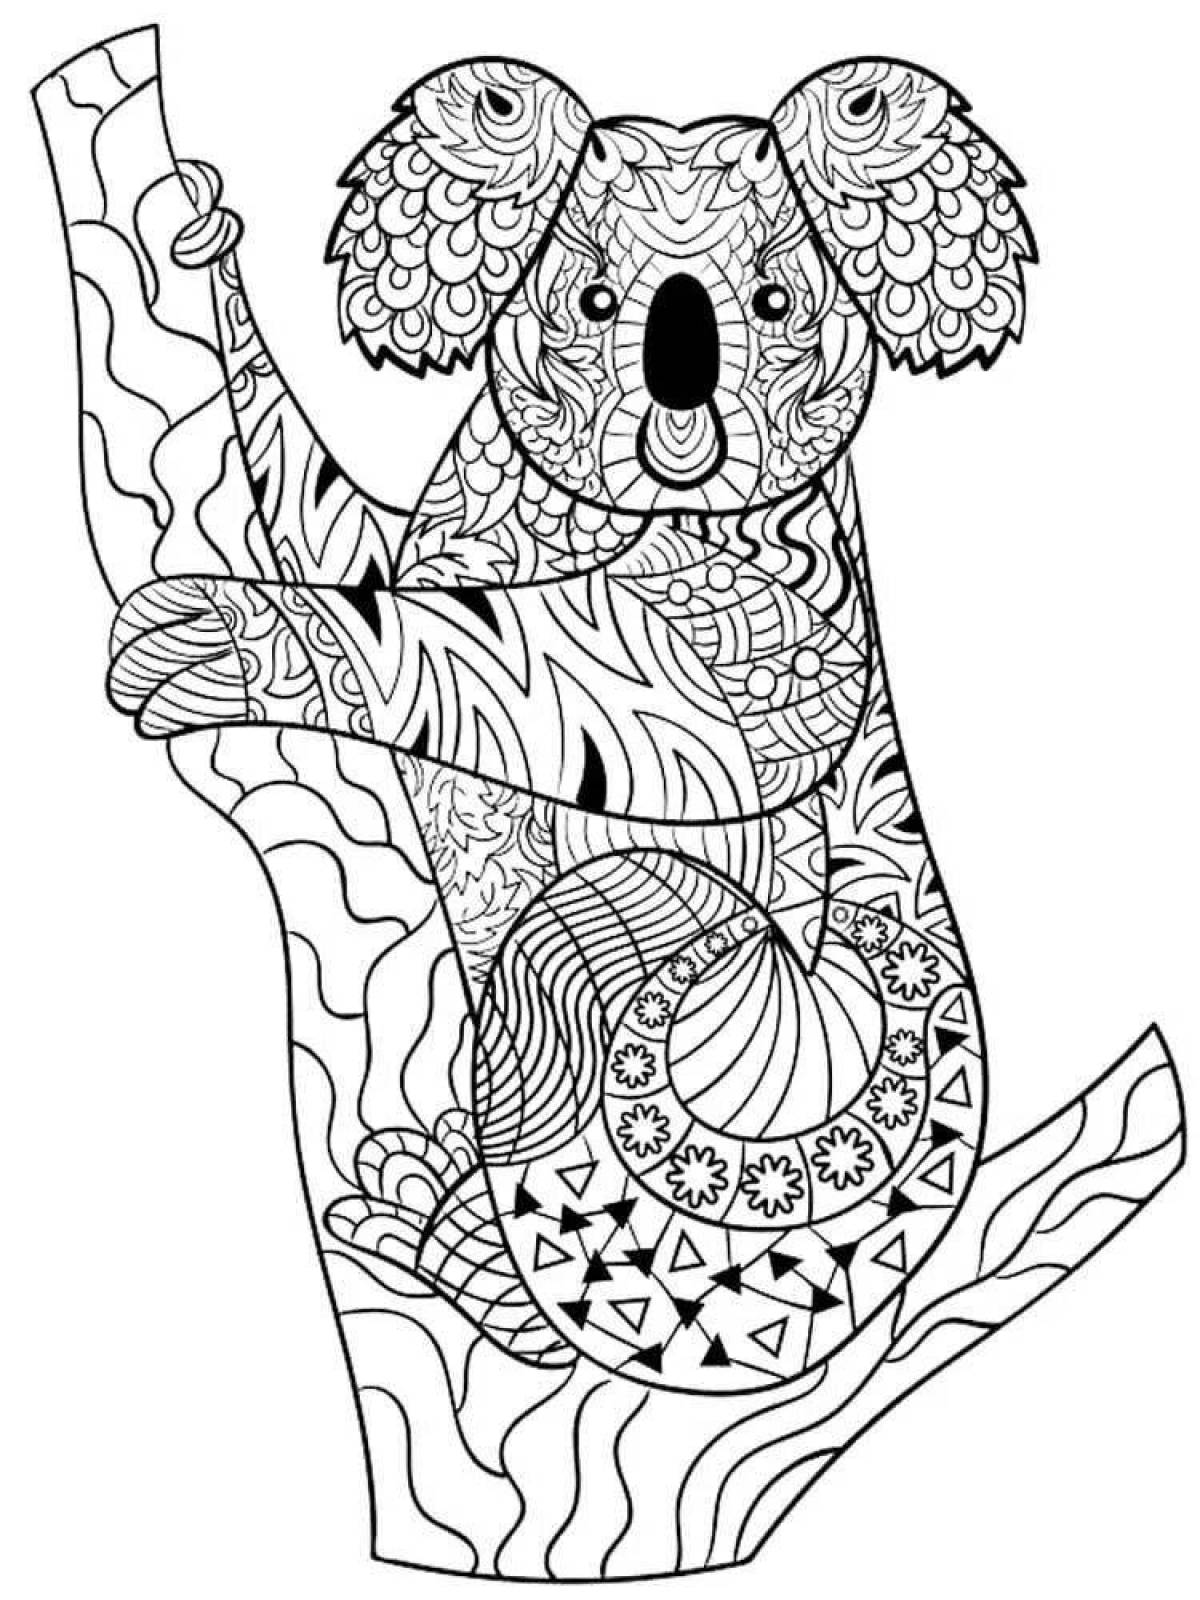 Fun animal coloring with a pattern